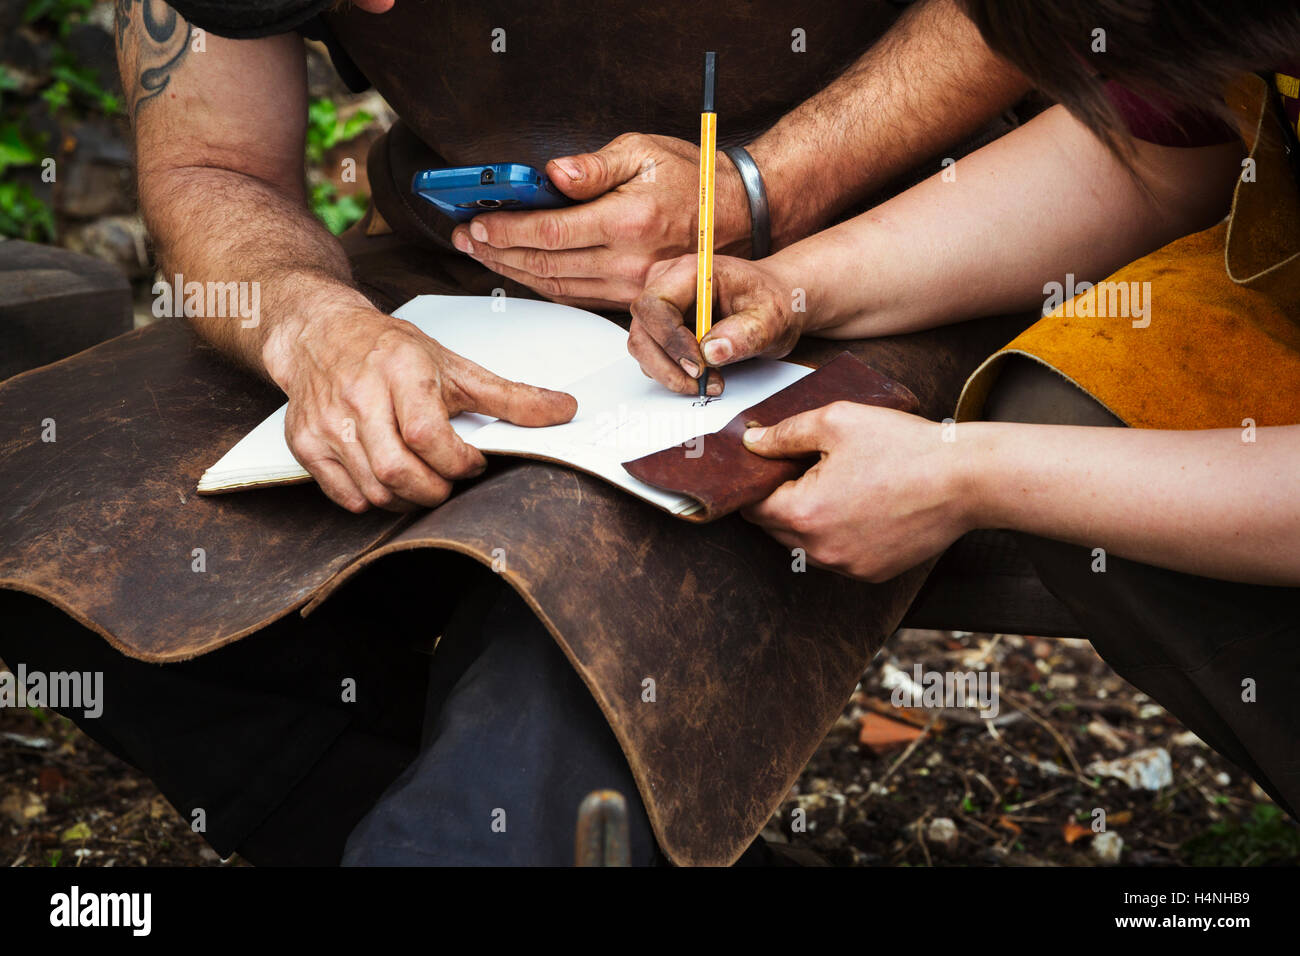 Man and woman, blacksmiths wearing aprons writing into a notebook sat in a garden. Stock Photo